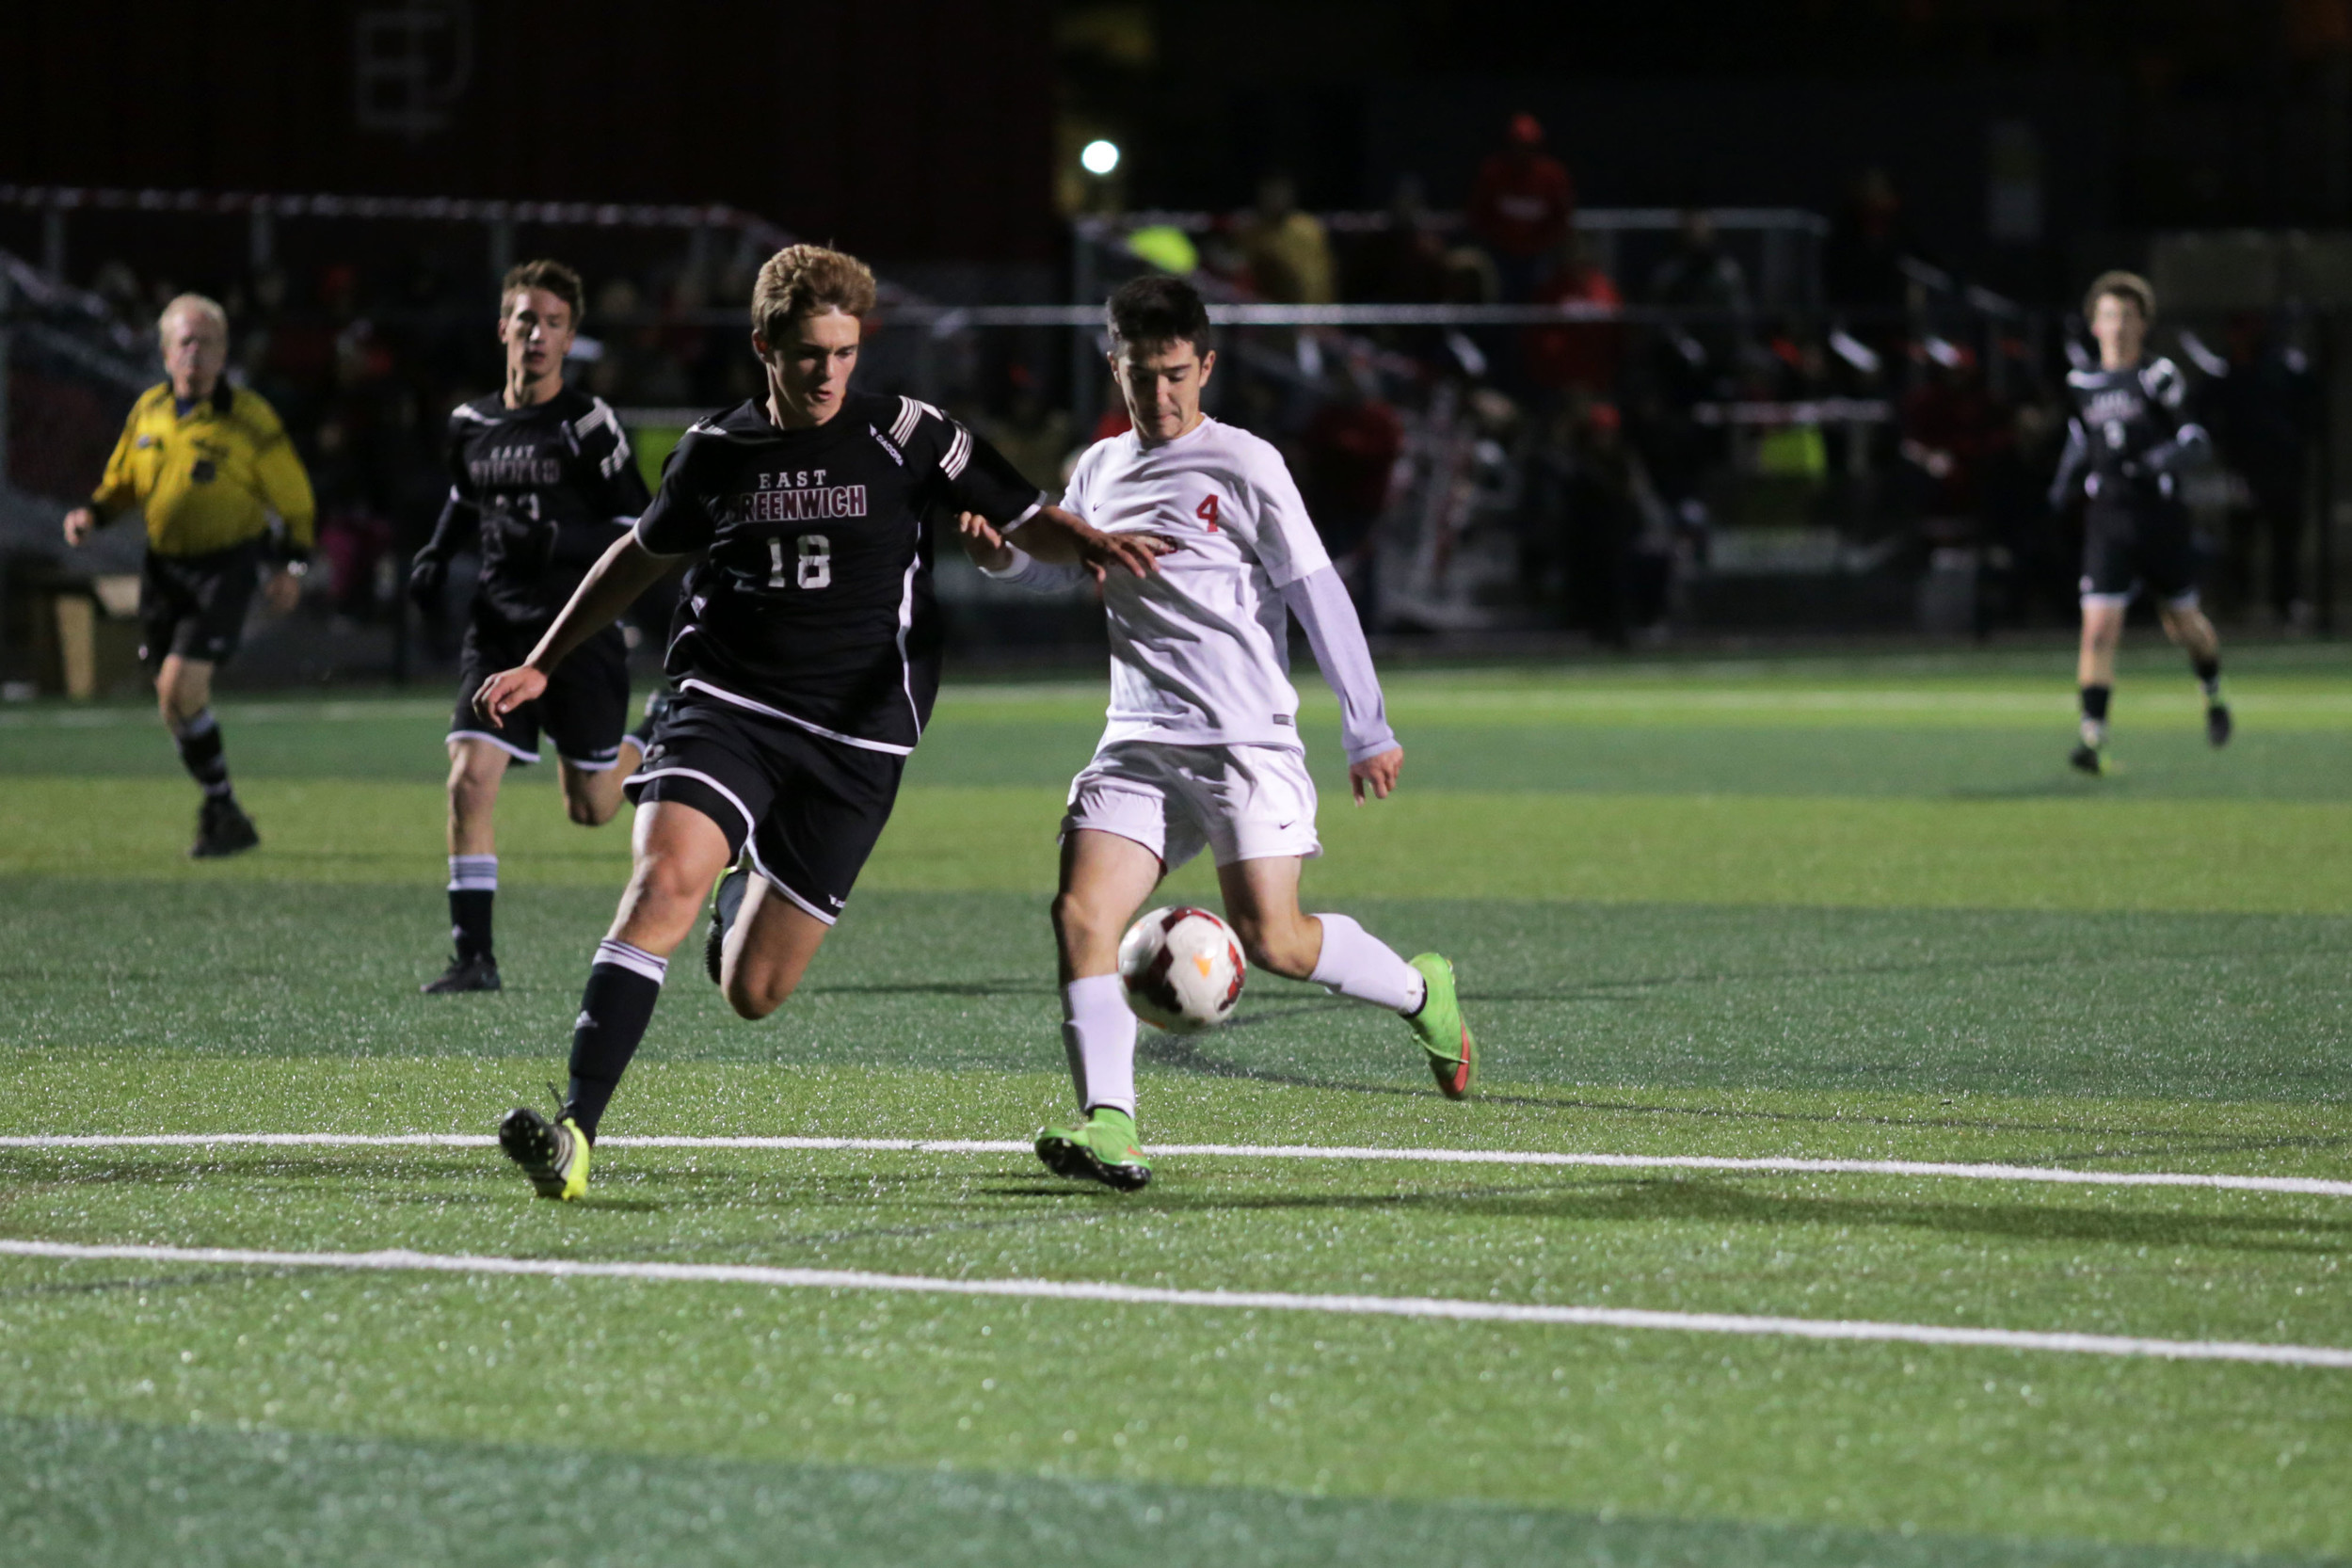 East Providence's Nathan Bento battles for control of the ball with a East Greenwich opponent.